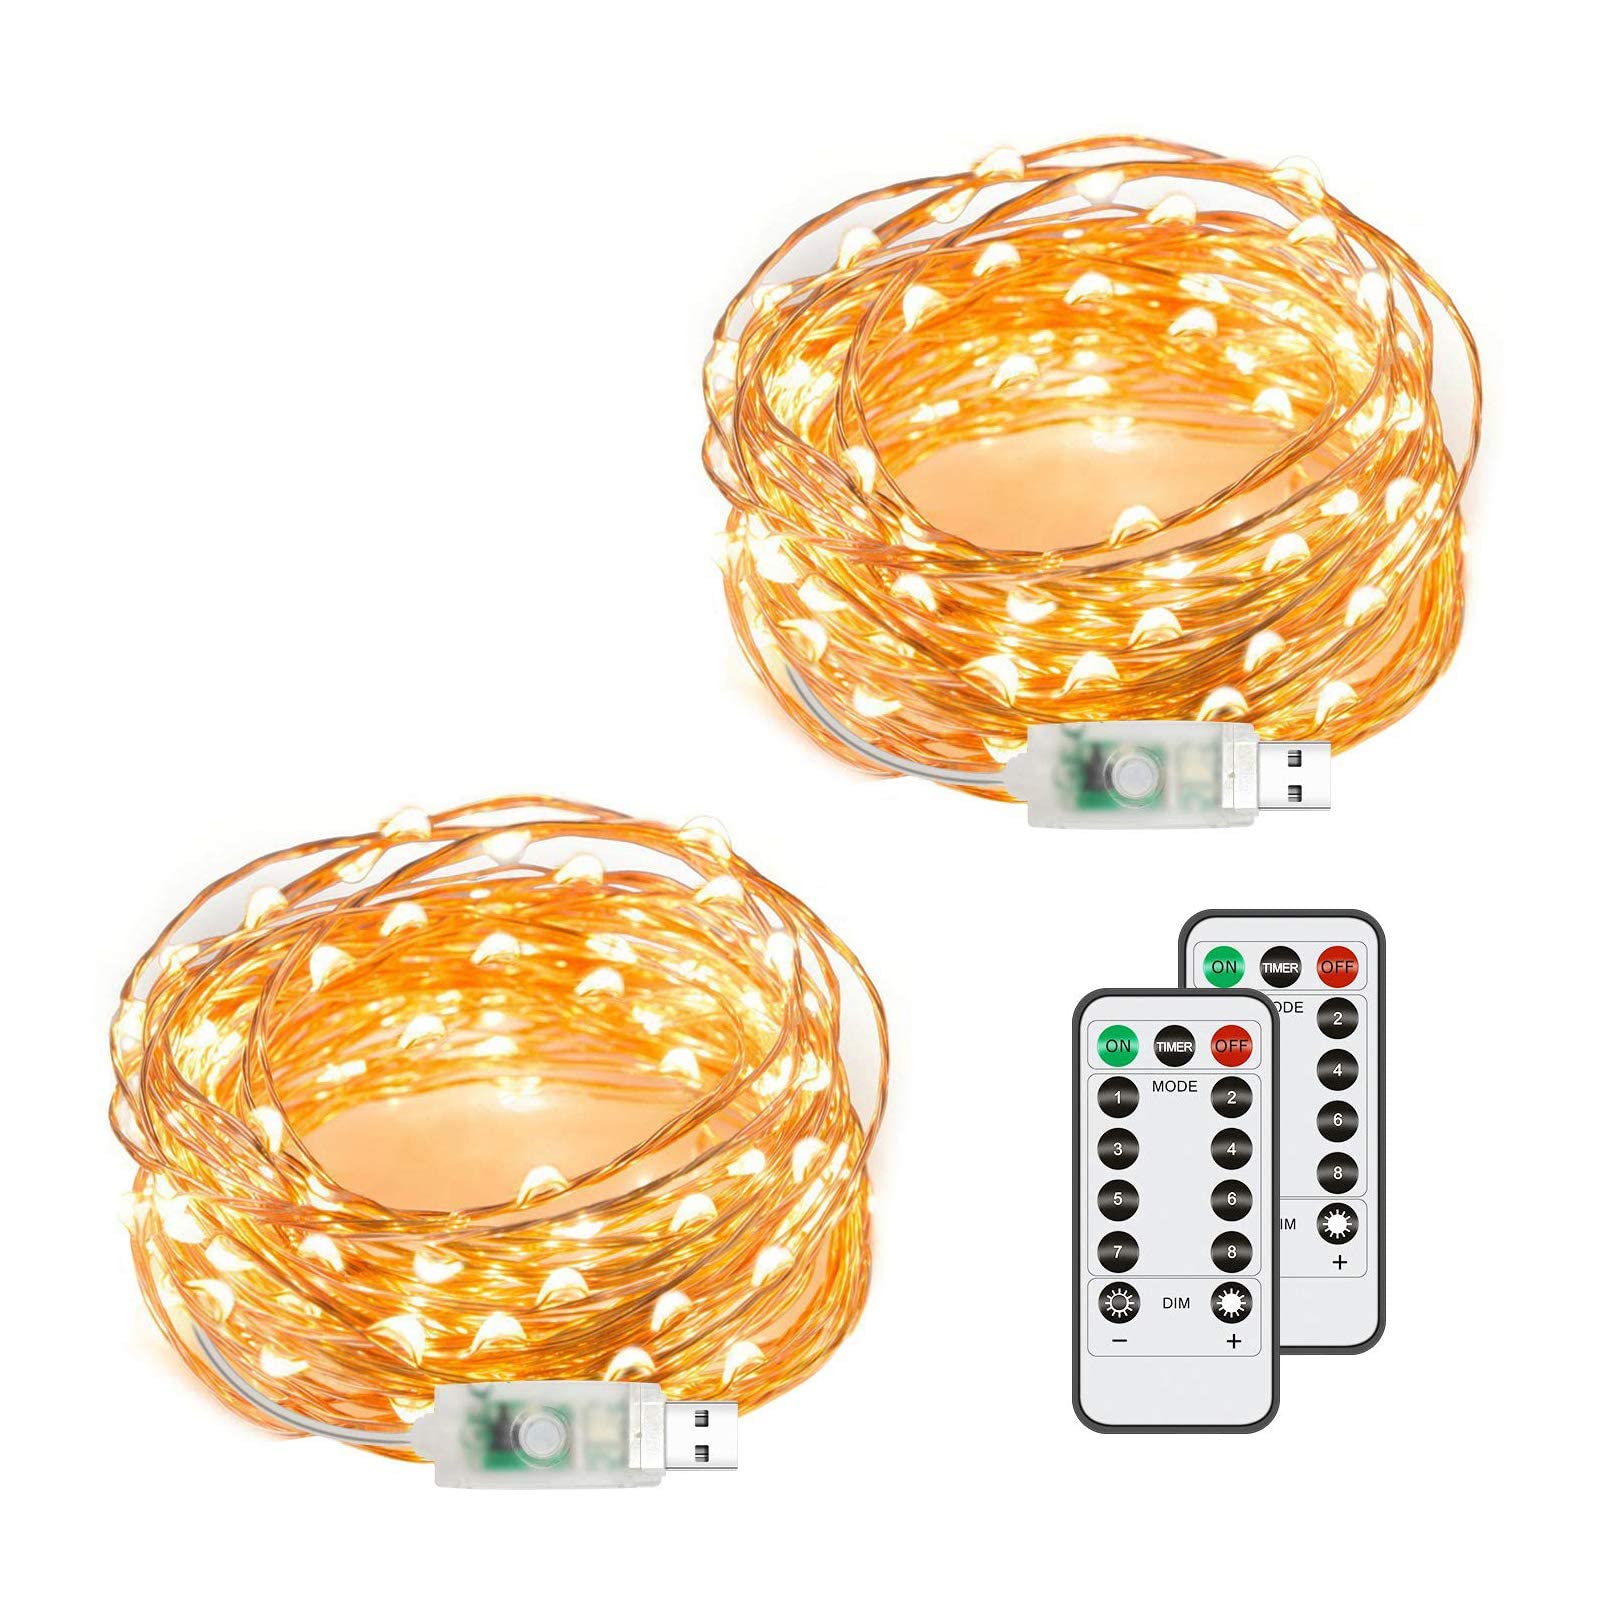 Chalpr USB Fairy String Lights, 2 Pack 50 LED 16.4Ft Led String Lights, Warm White Firefly USB Plug in Starry Lights with Remote,Waterproof Copper Wire Decorative Fairy Lights for Valentine's Day